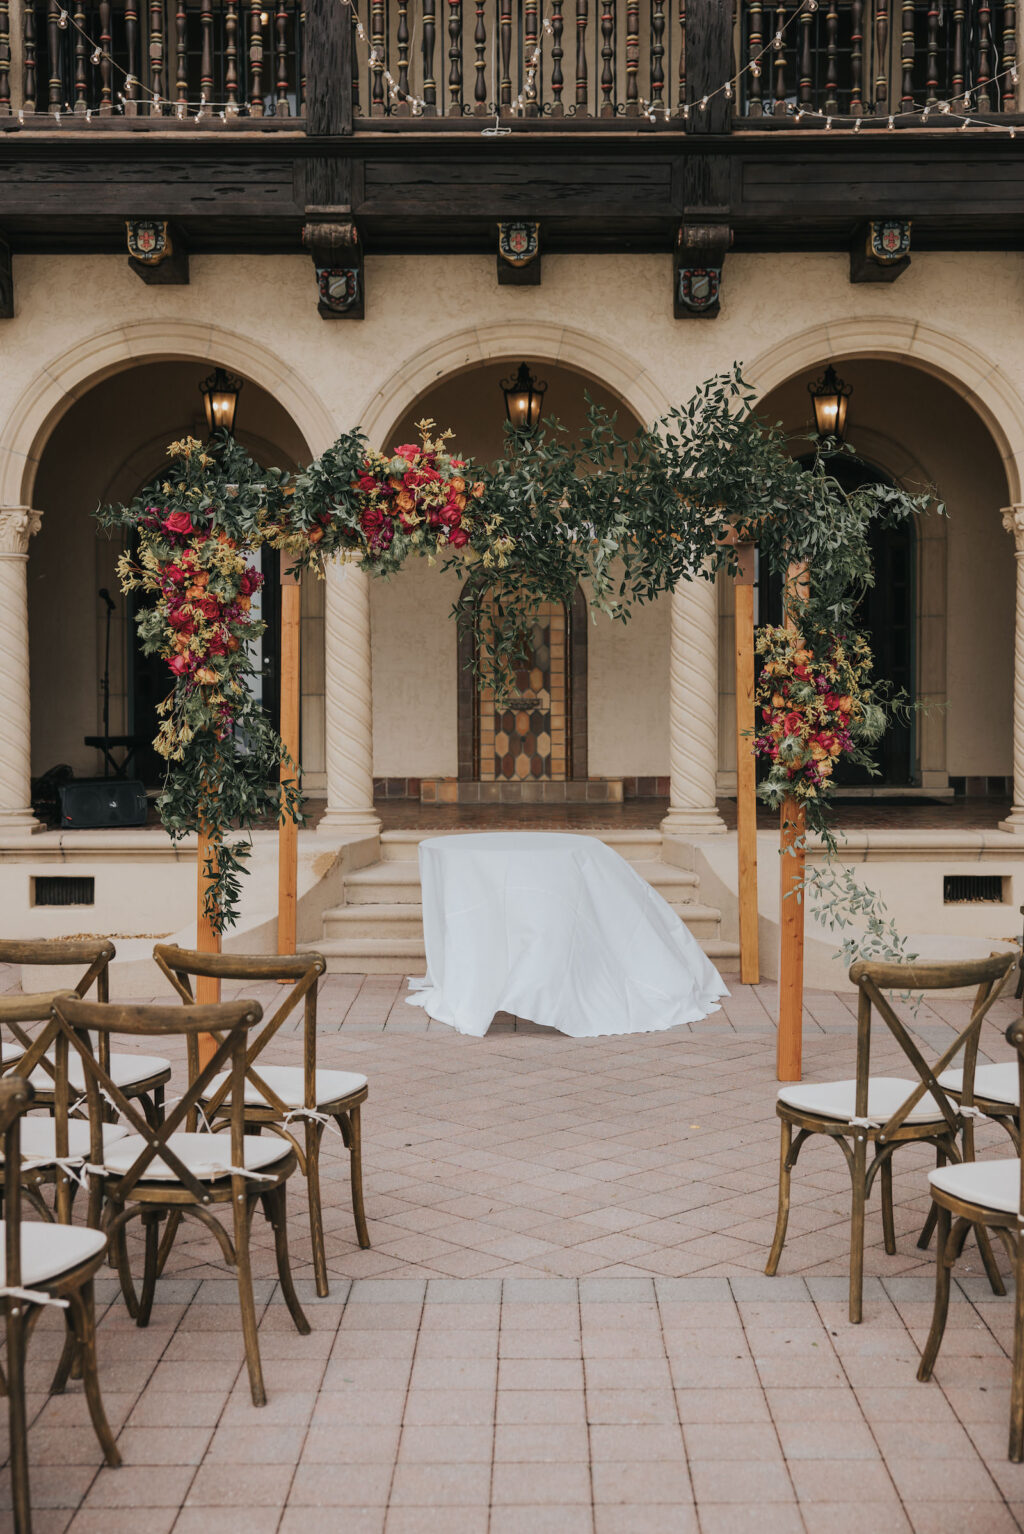 Florida Outdoor Jewish Wedding Chuppah | Wooden Ceremony Chairs and Wooden Wedding Arch with Orange and Pink Florals at Estate Wedding Ceremony in South Florida | Sarasota Wedding Planner MDP Events